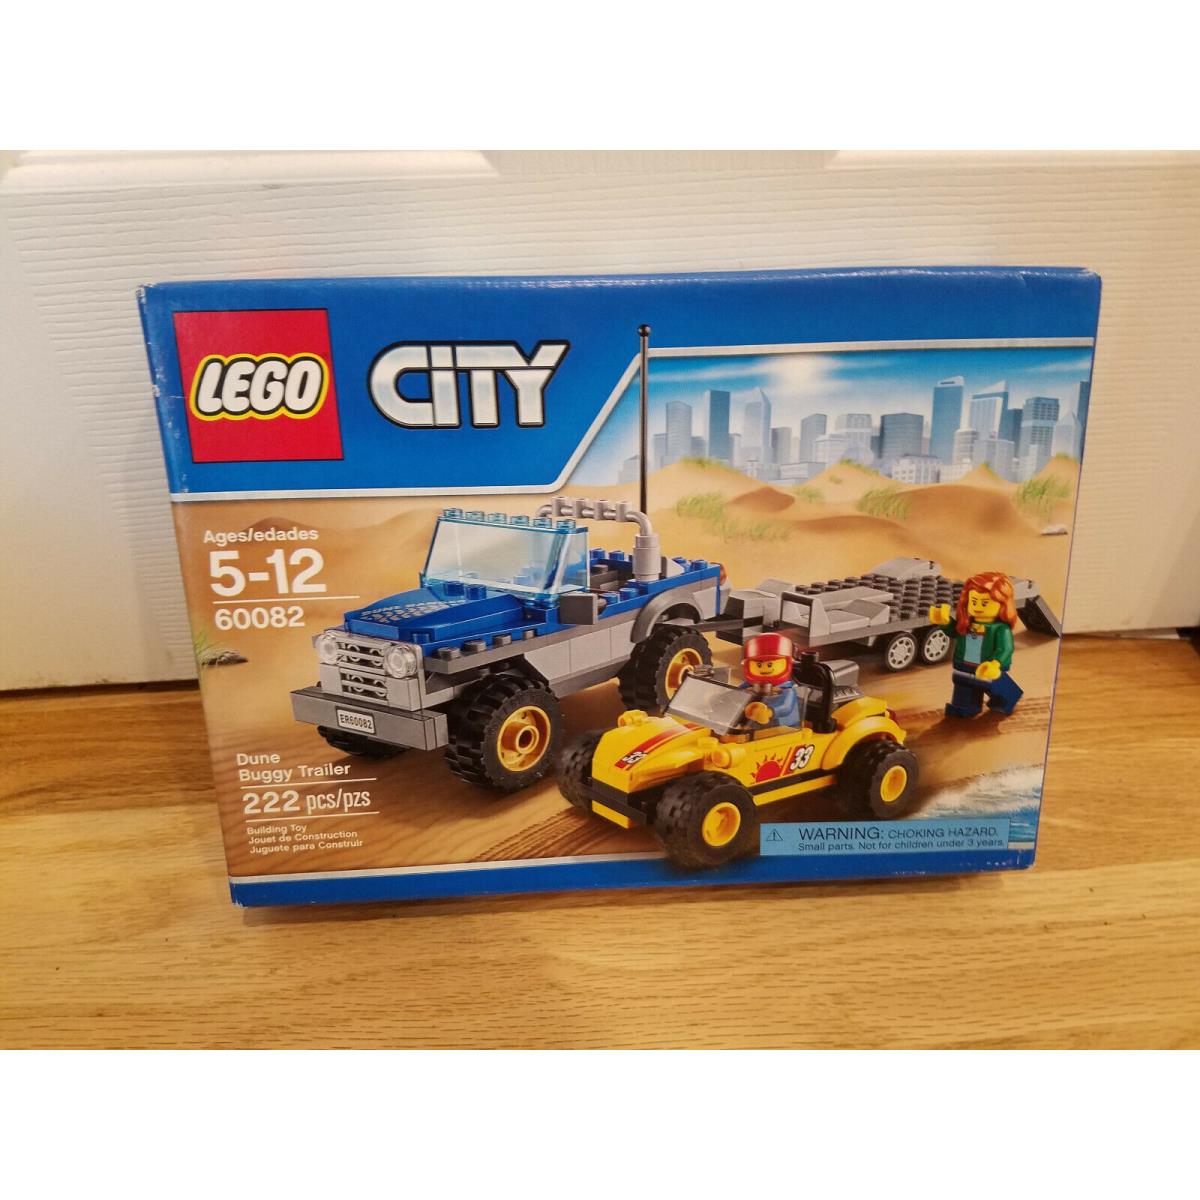 Lego City Jeep Dune Buggy Trailer 60082 Set 222 pc Retired